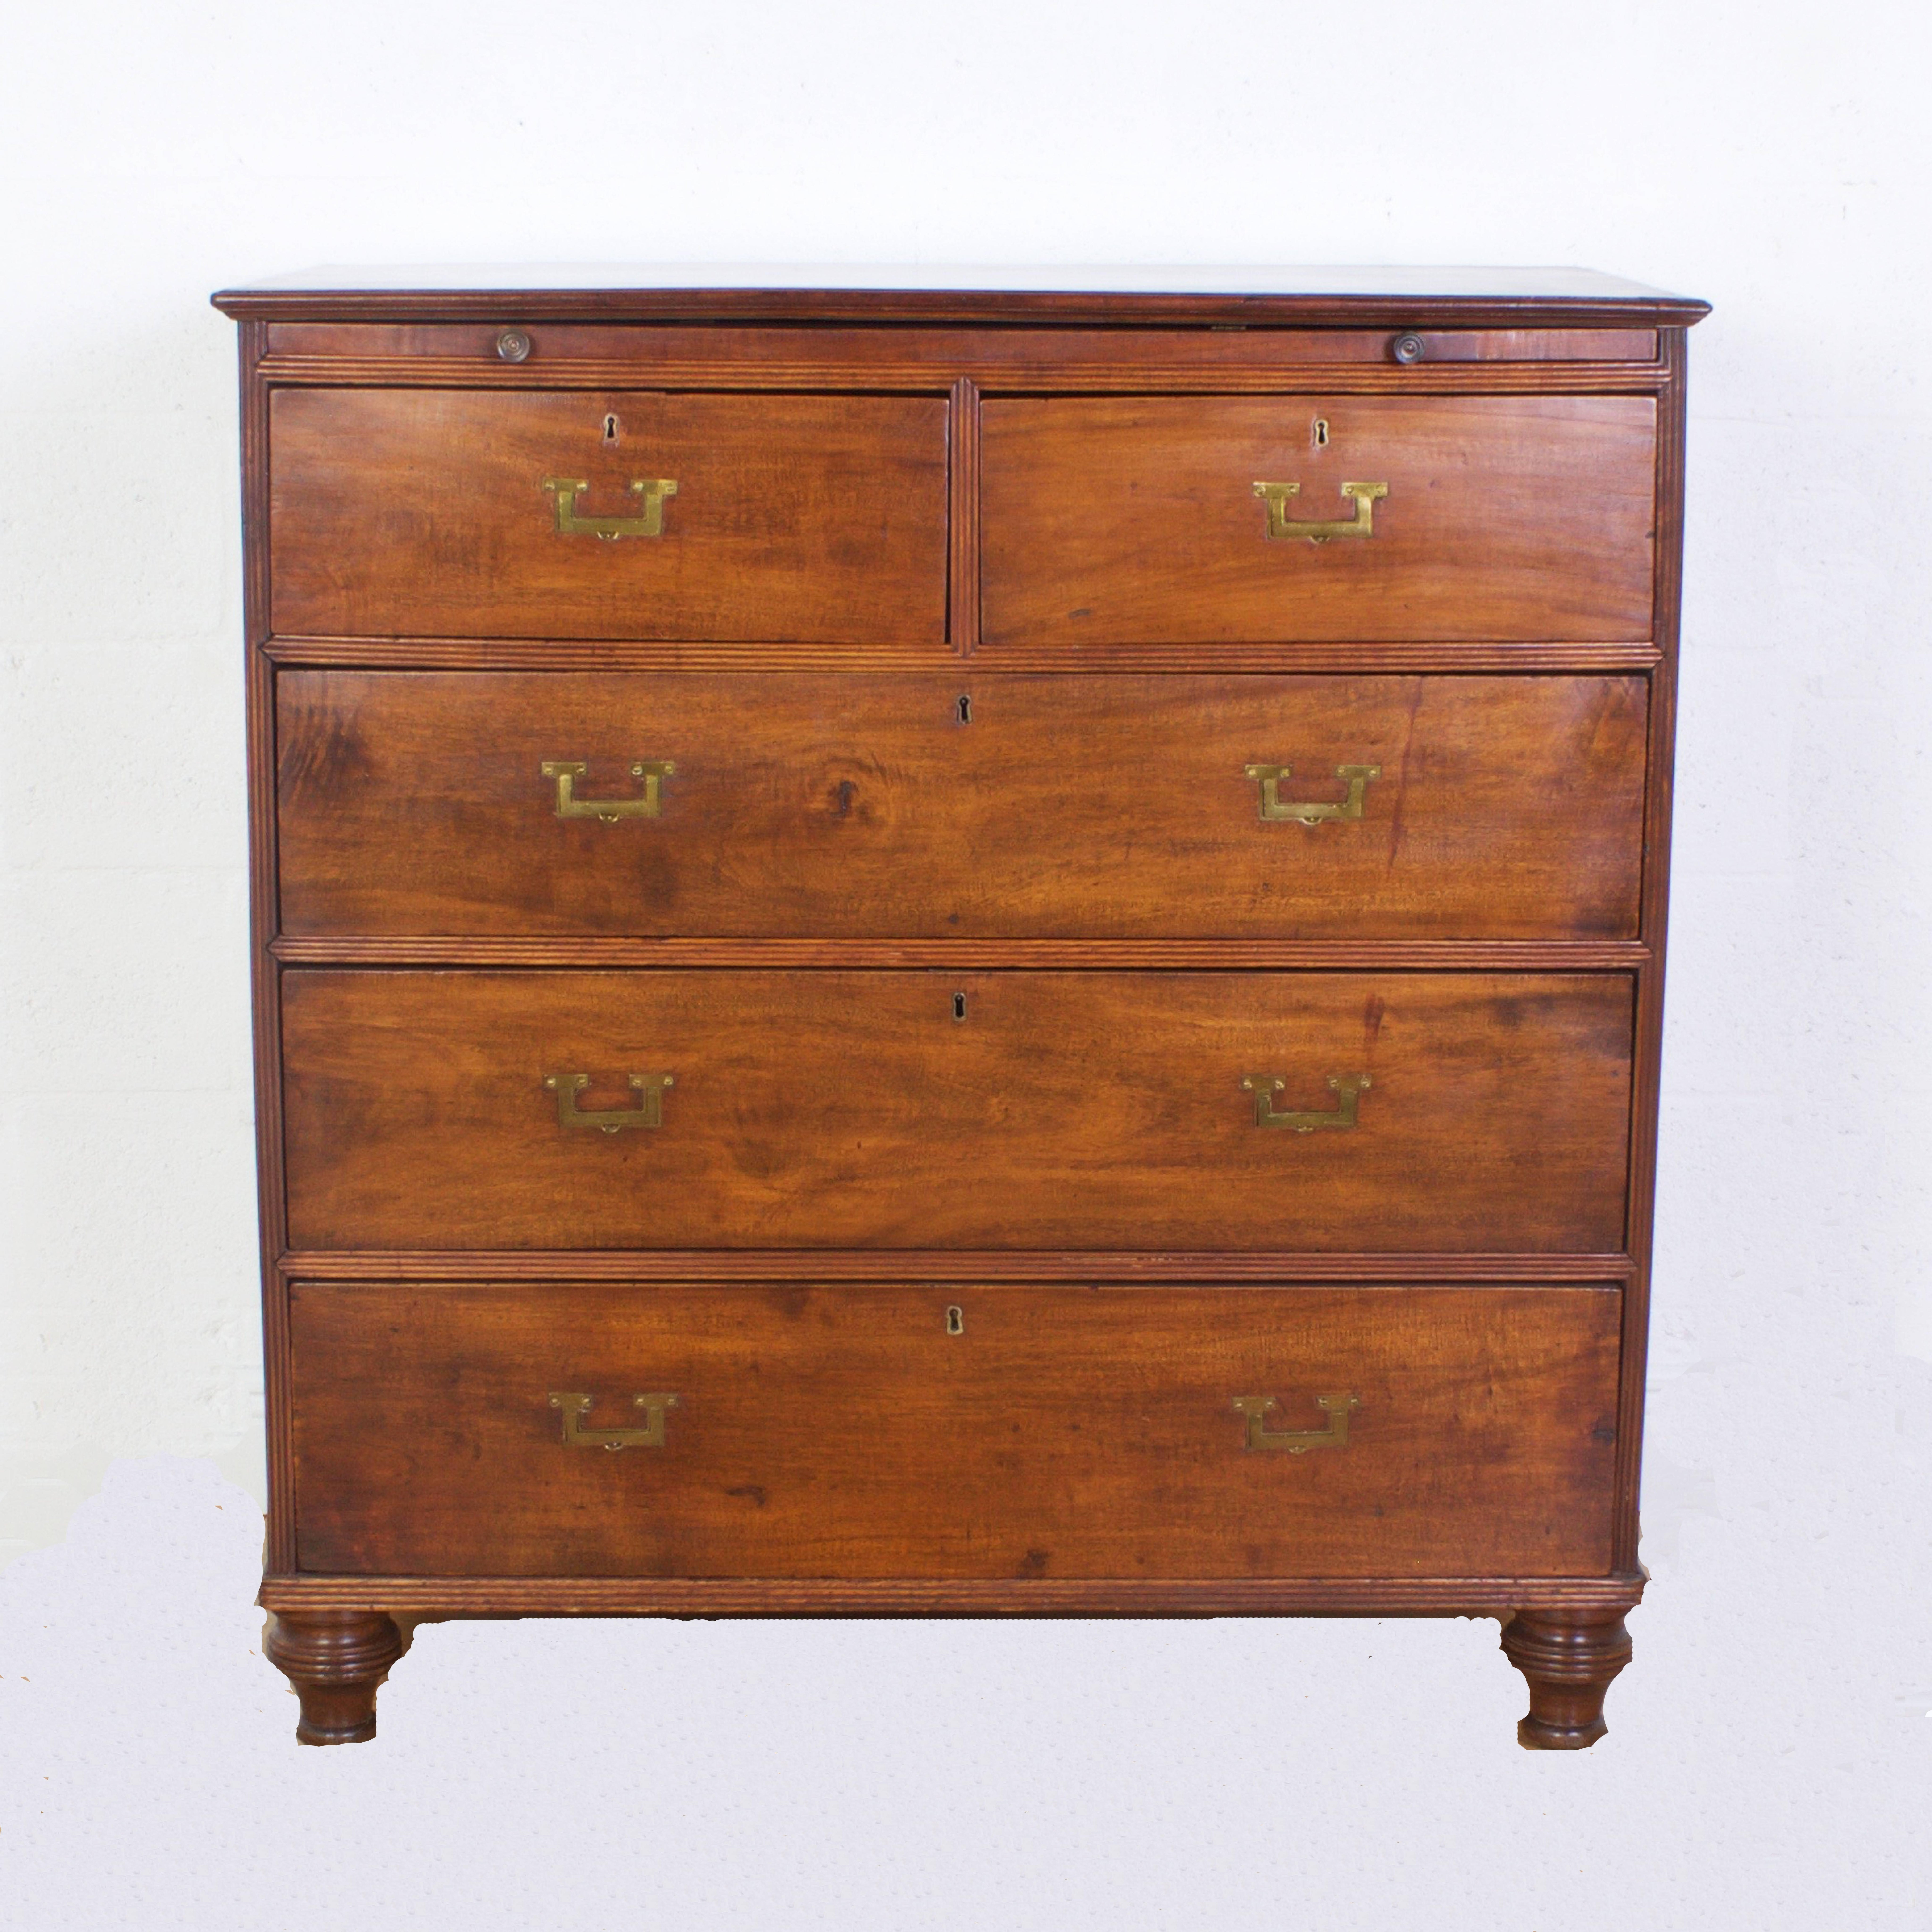 Antique English mahogany Campaign chest of drawers with Campaign style brass hardware, beaded drawer supports and Classic turned feet. This Campaign chest features a pullout desk with an adjustable writing and reading tray. Well-chosen wood grains